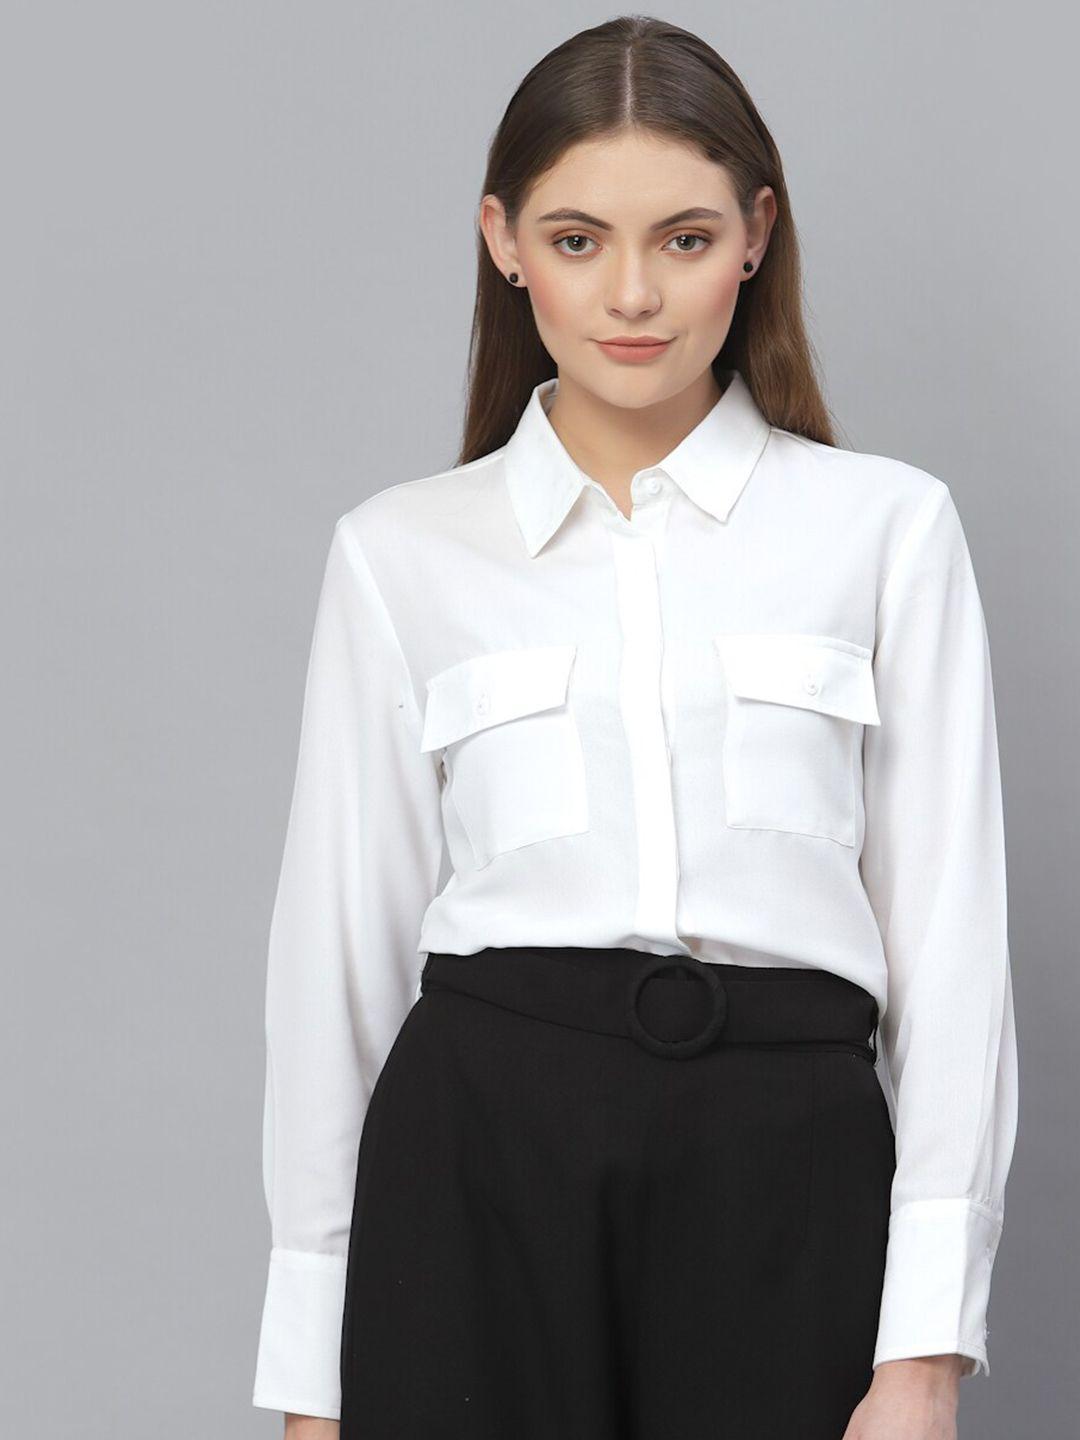 style-quotient-women-white-formal-shirt